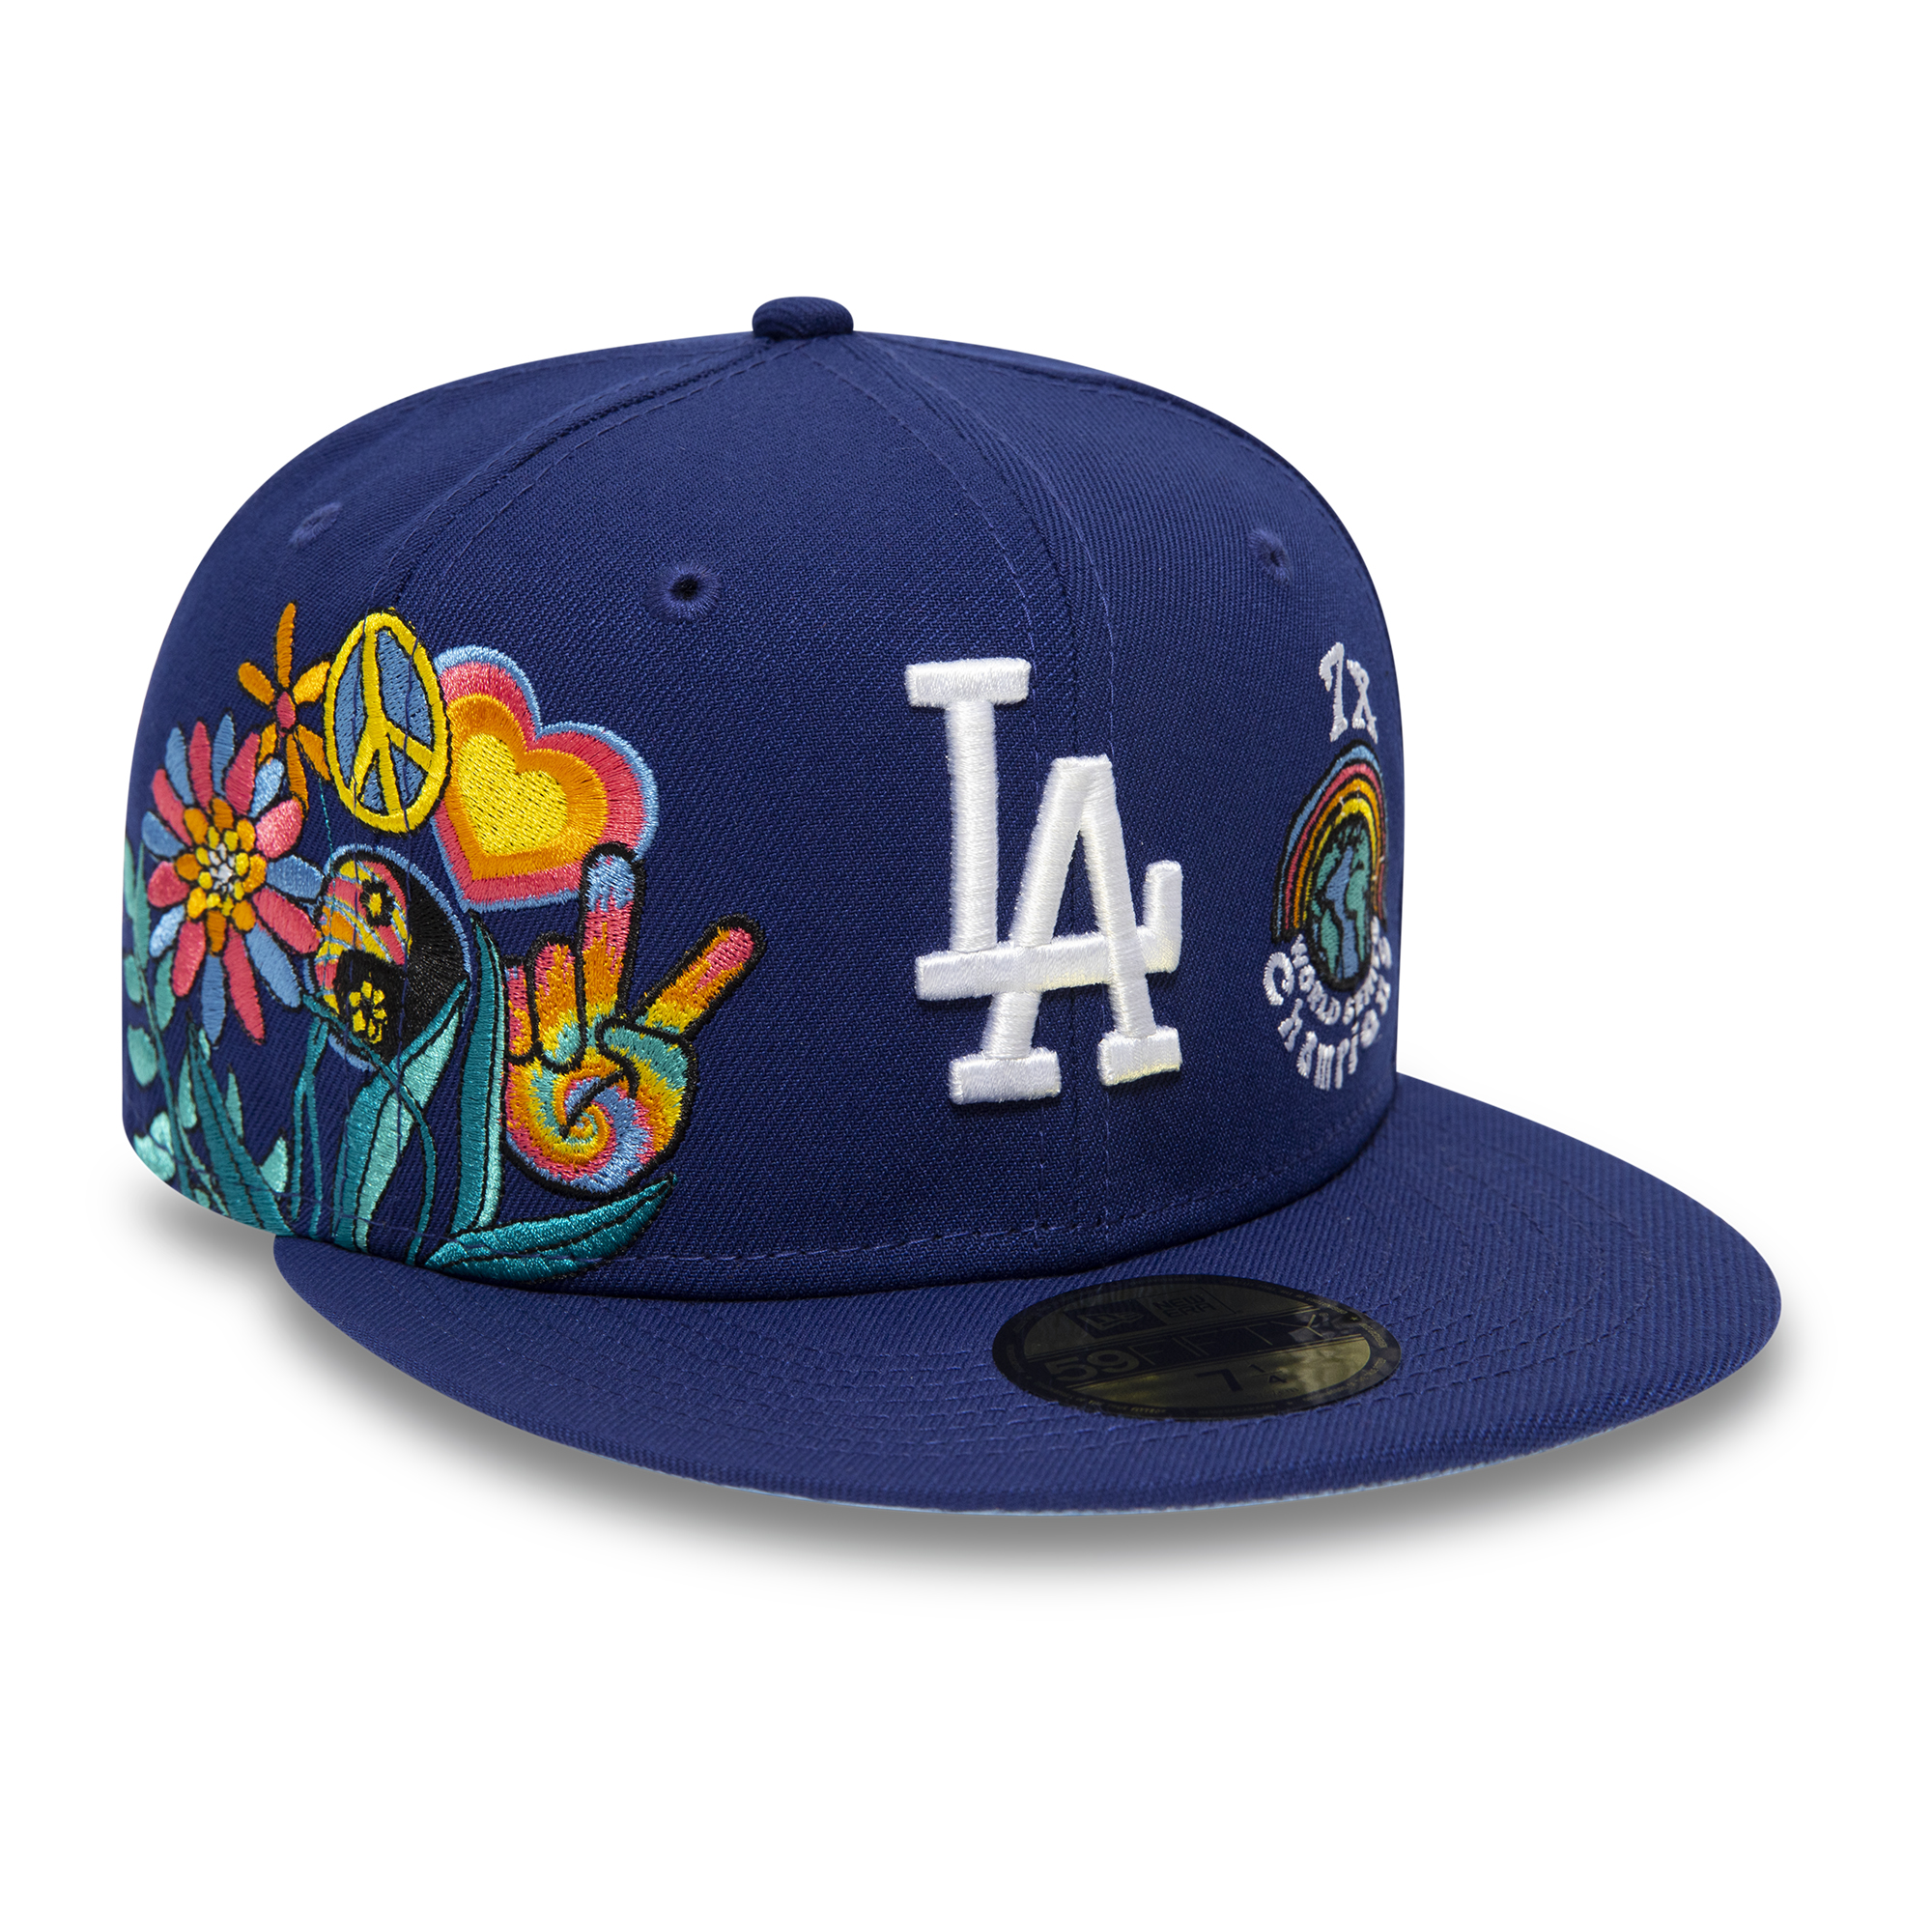 Official New Era LA Dodgers MLB Groovy Dark Royal Blue 59FIFTY Fitted ...